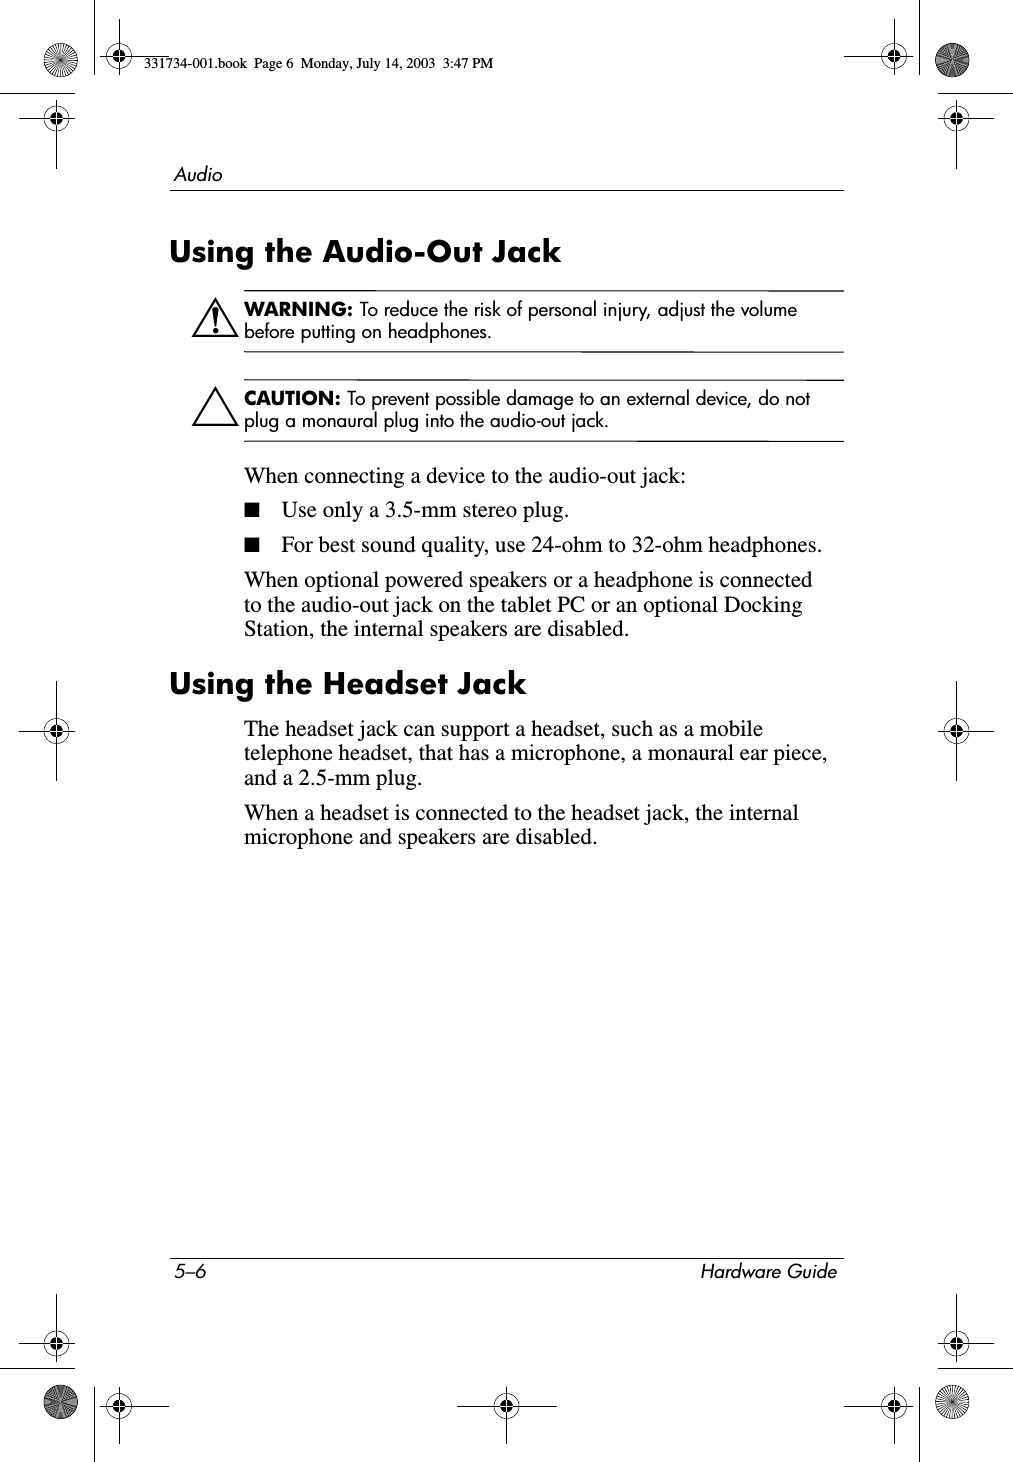 5–6 Hardware GuideAudioUsing the Audio-Out JackÅWARNING: To reduce the risk of personal injury, adjust the volume before putting on headphones.ÄCAUTION: To prevent possible damage to an external device, do not plug a monaural plug into the audio-out jack.When connecting a device to the audio-out jack:■Use only a 3.5-mm stereo plug.■For best sound quality, use 24-ohm to 32-ohm headphones.When optional powered speakers or a headphone is connected to the audio-out jack on the tablet PC or an optional Docking Station, the internal speakers are disabled.Using the Headset JackThe headset jack can support a headset, such as a mobile telephone headset, that has a microphone, a monaural ear piece, and a 2.5-mm plug.When a headset is connected to the headset jack, the internal microphone and speakers are disabled.331734-001.book  Page 6  Monday, July 14, 2003  3:47 PM